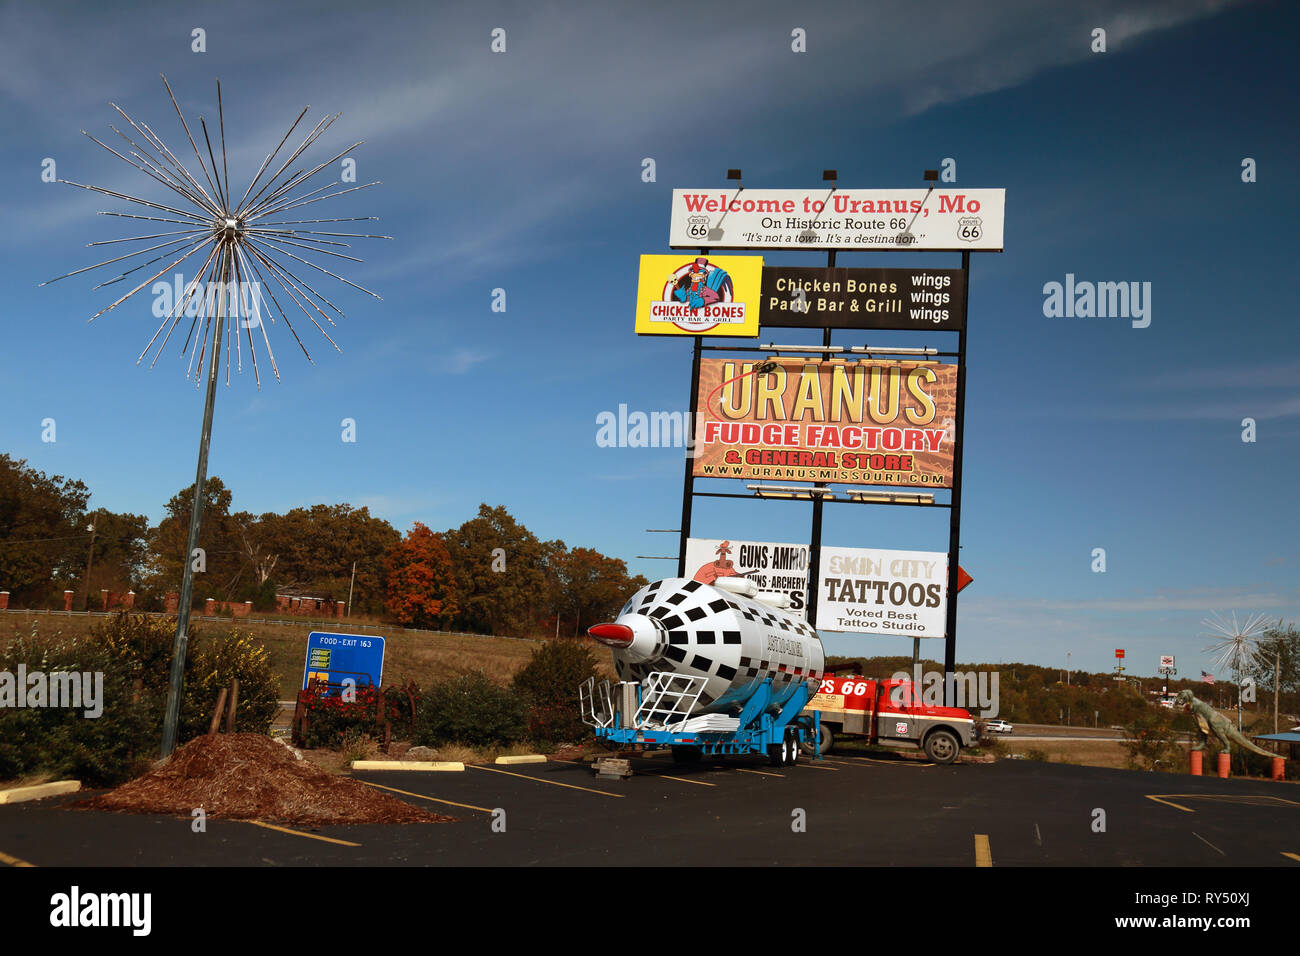 Welcome signs for Uranus in Southwest Missouri, USA, on historic Route 66 in St. Robert Stock Photo